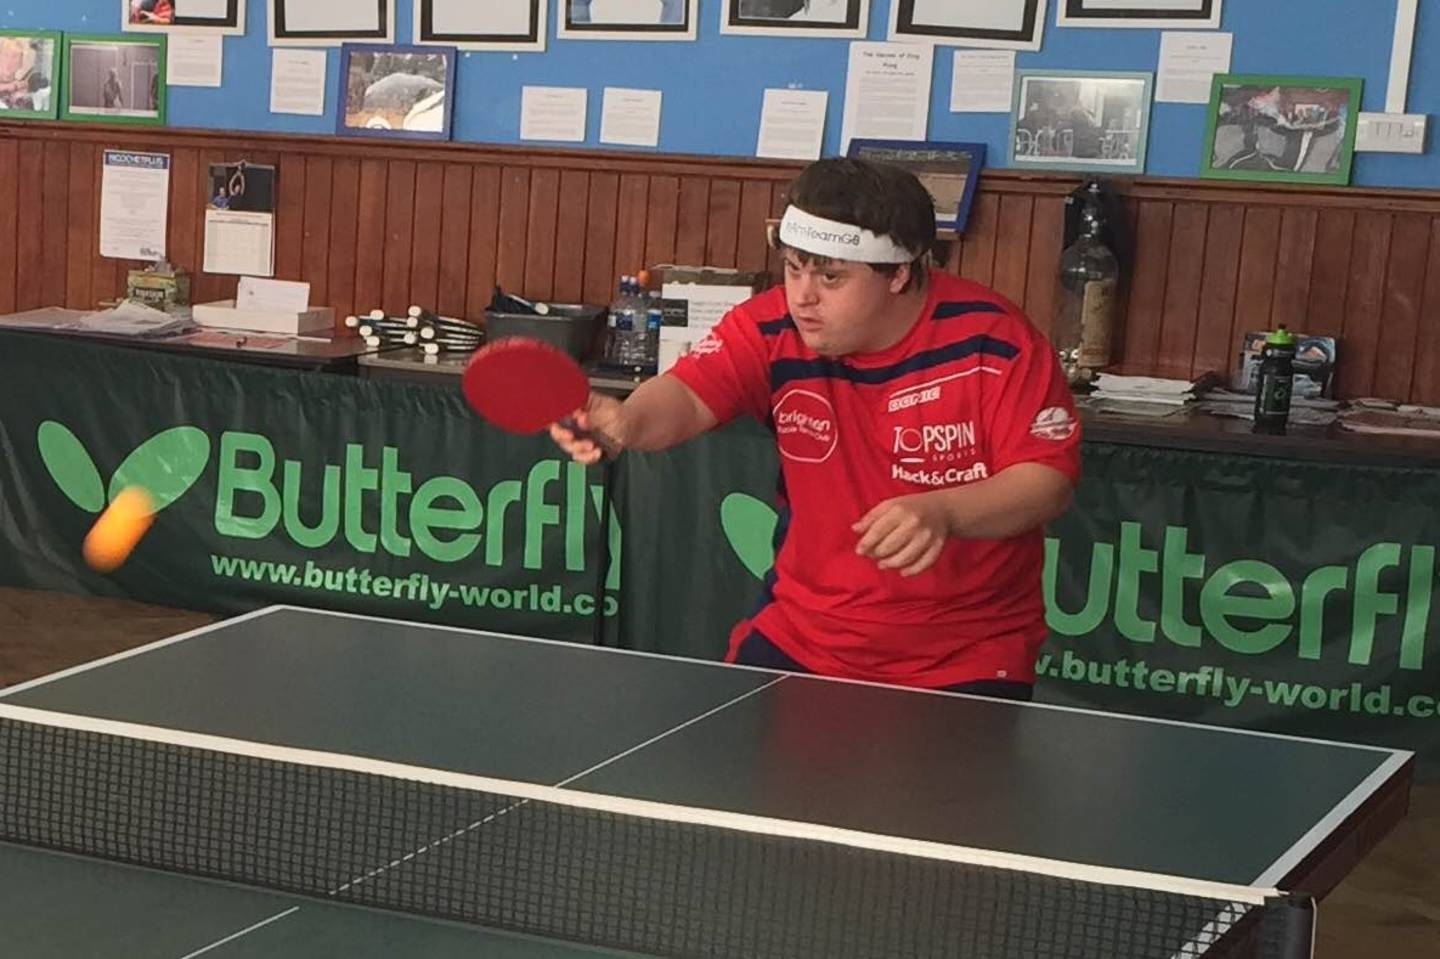 Grassroots Games 2016 Table Tennis Activity Alliance